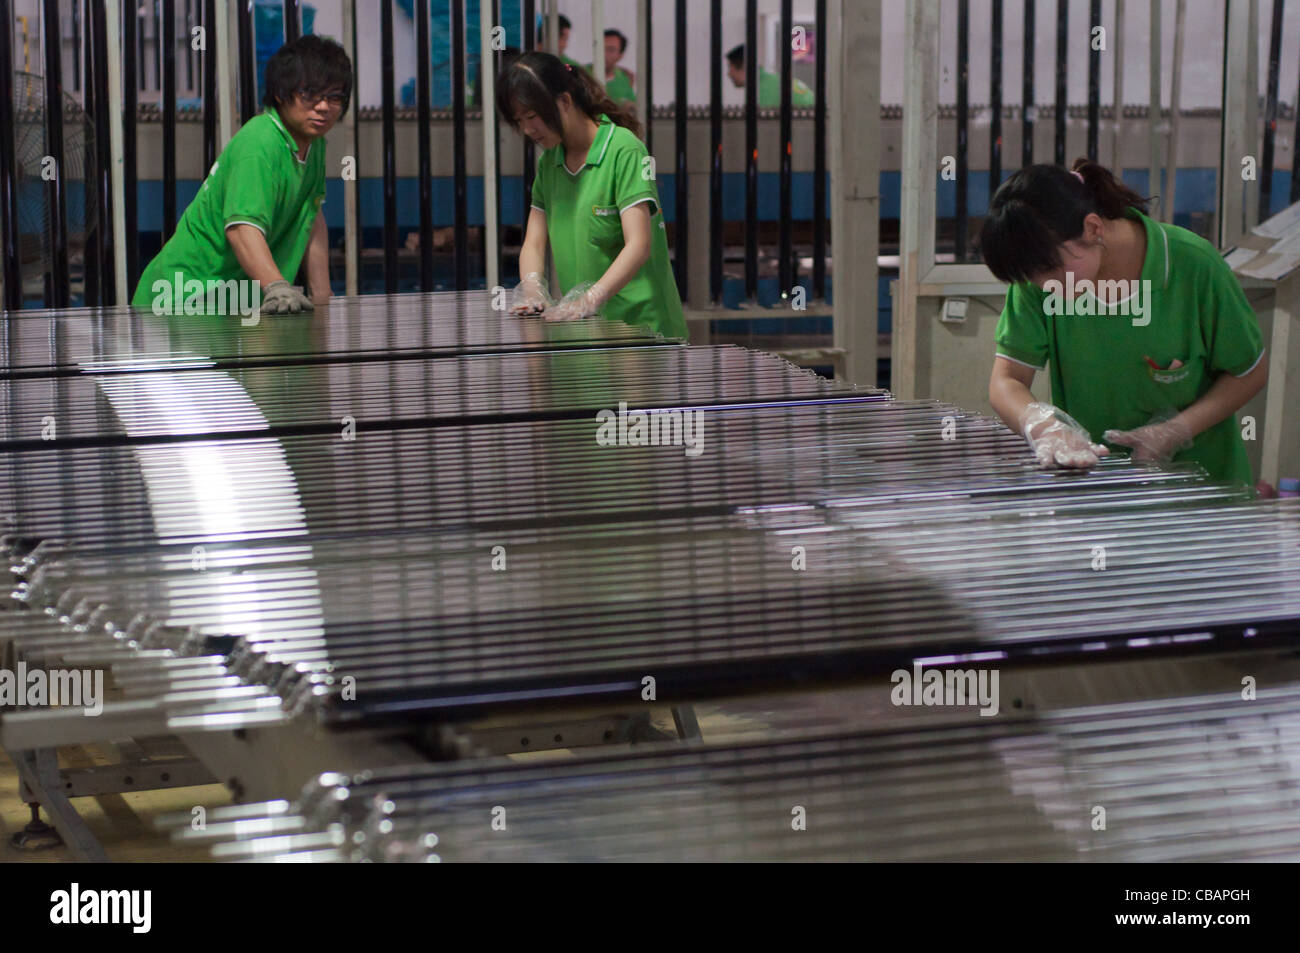 Workers in the Himin Solar Corporation, a Chinese factory leader in producing solar water heaters. China Solar Valley, Dezhou, Shandong, China Stock Photo